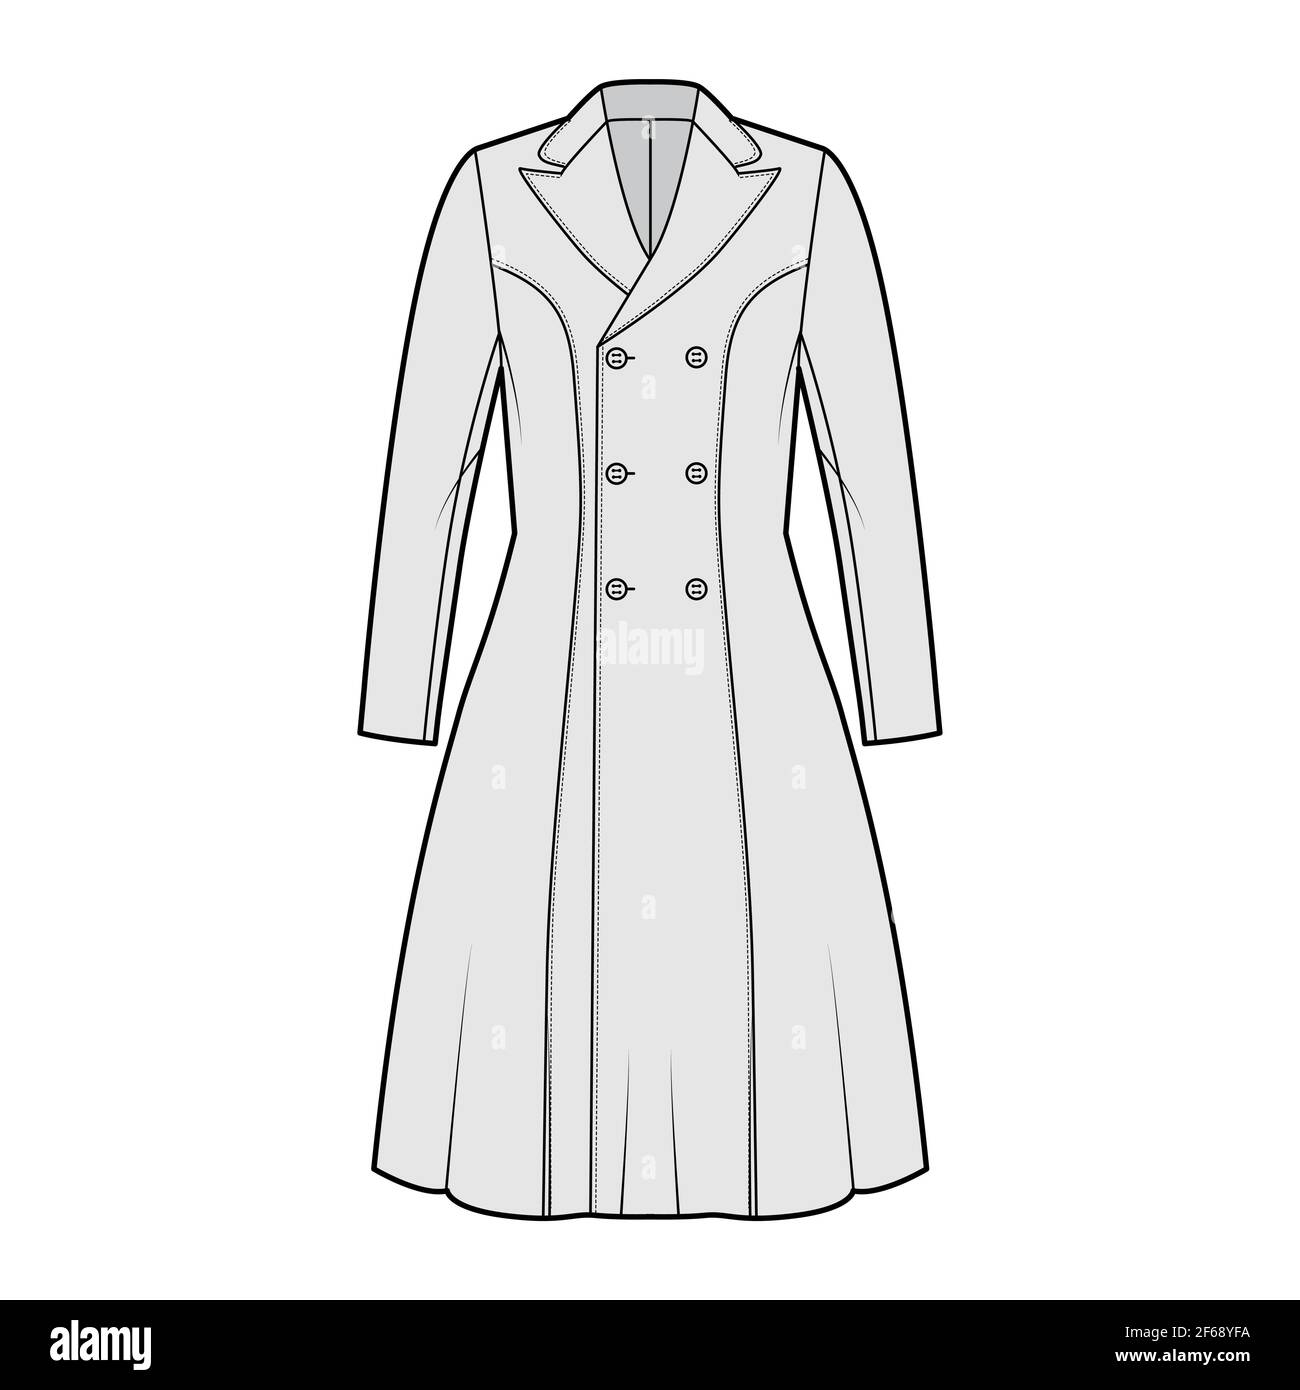 Princess line coat technical fashion illustration with double breasted, fitted body, long sleeves, peak lapel collar, knee length. Flat jacket template front, grey color style. Women, men, CAD mockup Stock Vector